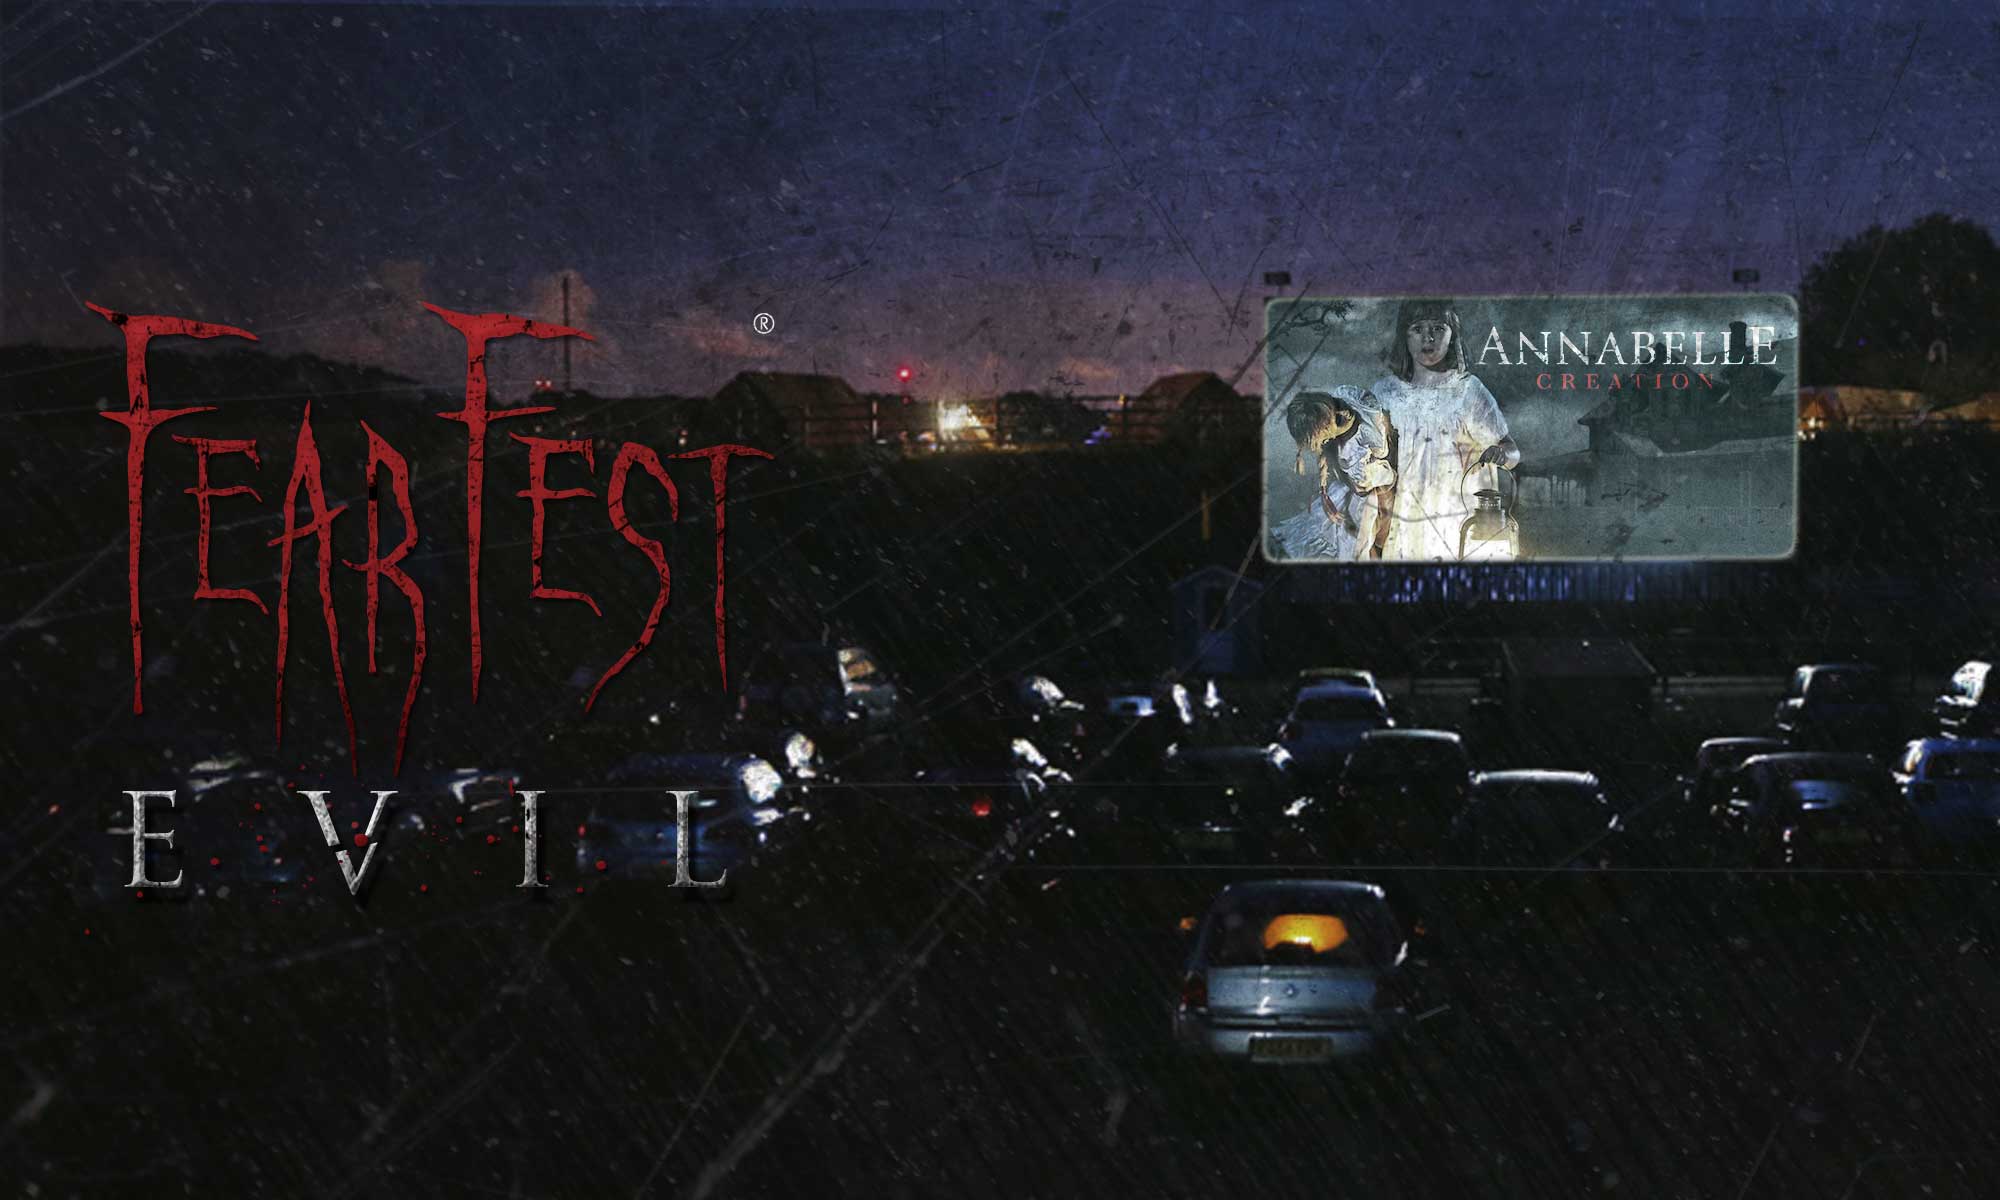 Annabelle Creation Free Drive-In Cinema Screening at FearFest-Evil September 2019